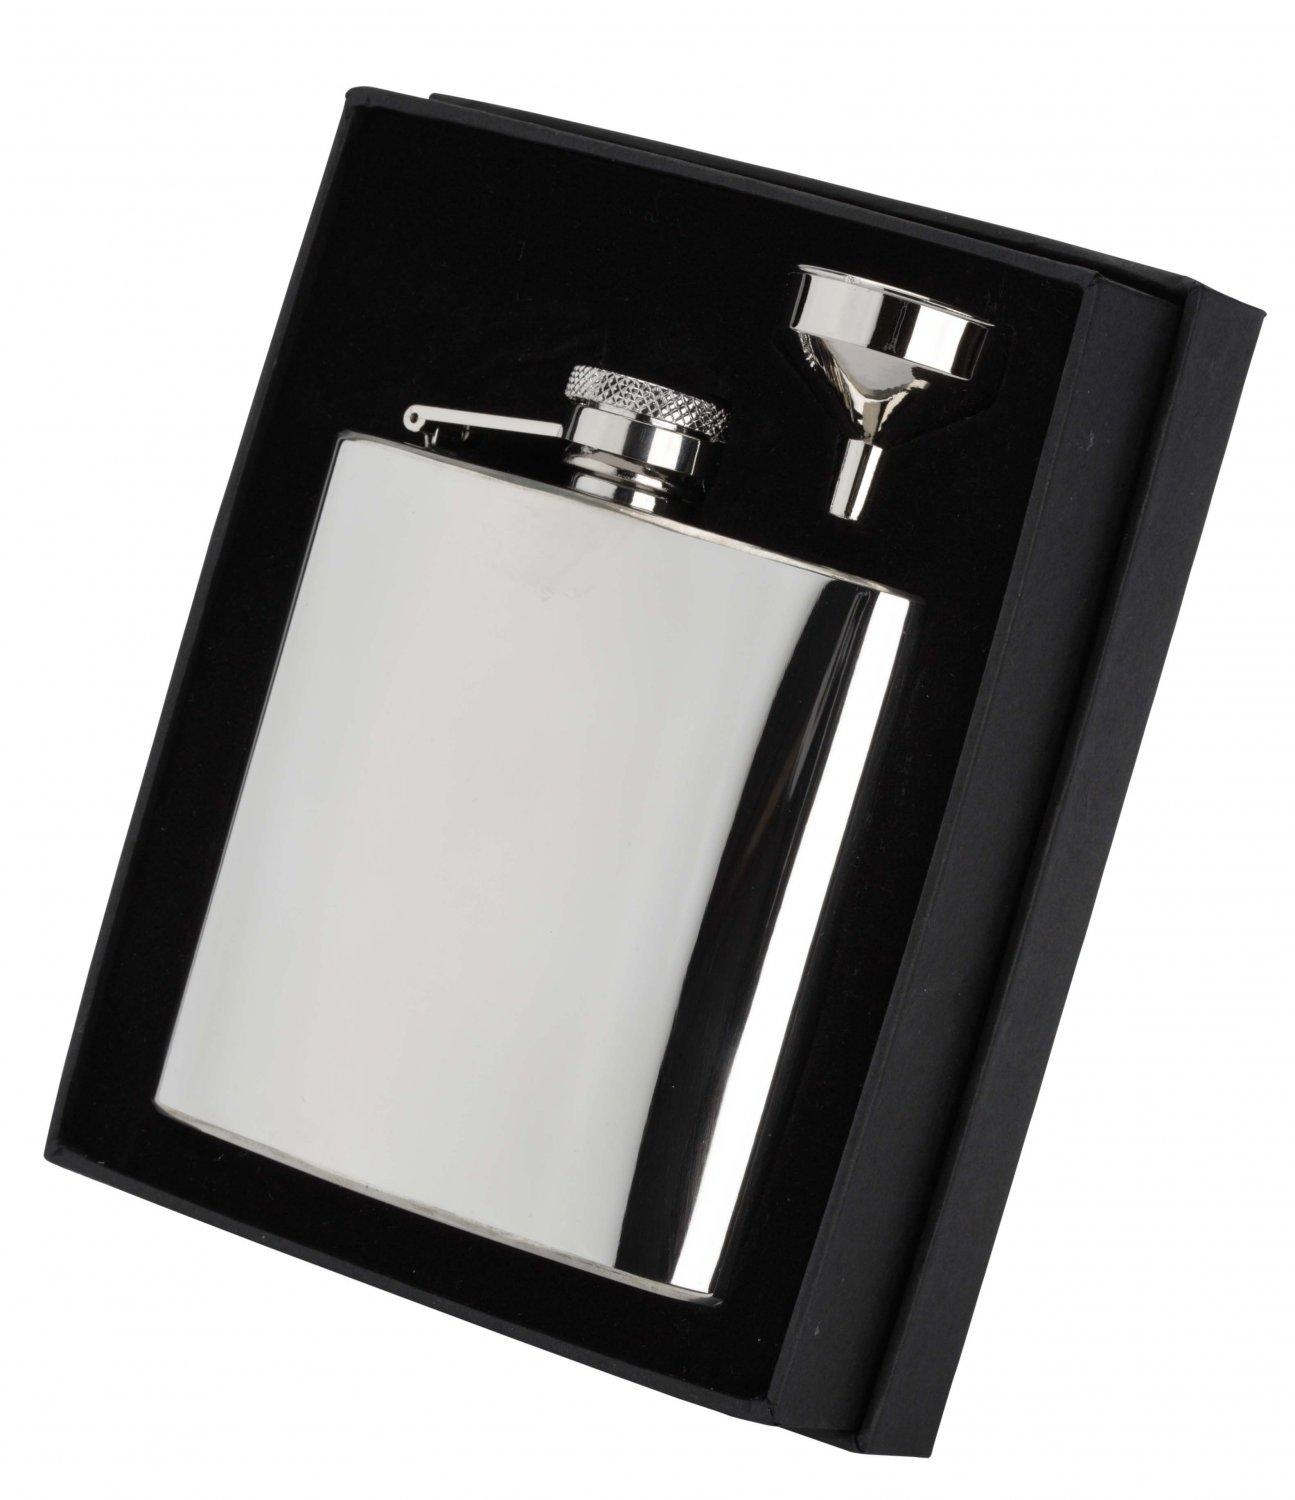 Stainless steel 6oz hipflask